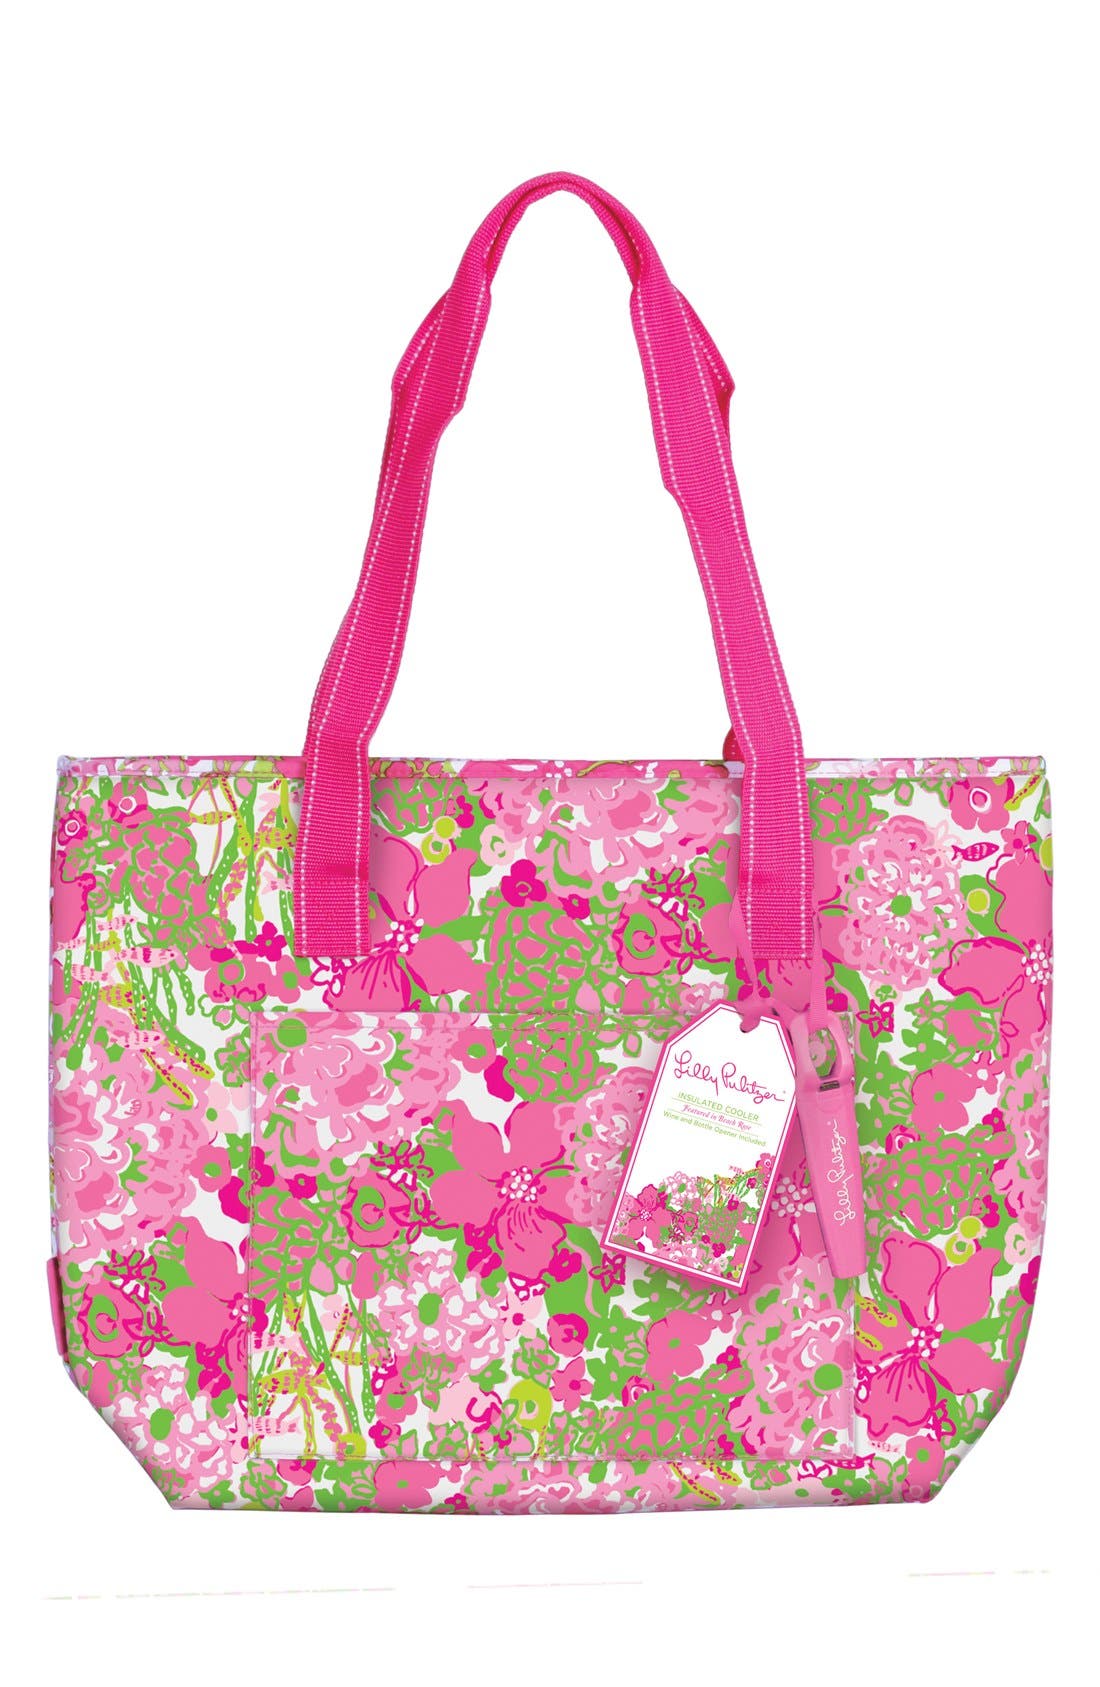 UPC 014321000069 - Lilly Pulitzer Insulated Beach Cooler Tote ...